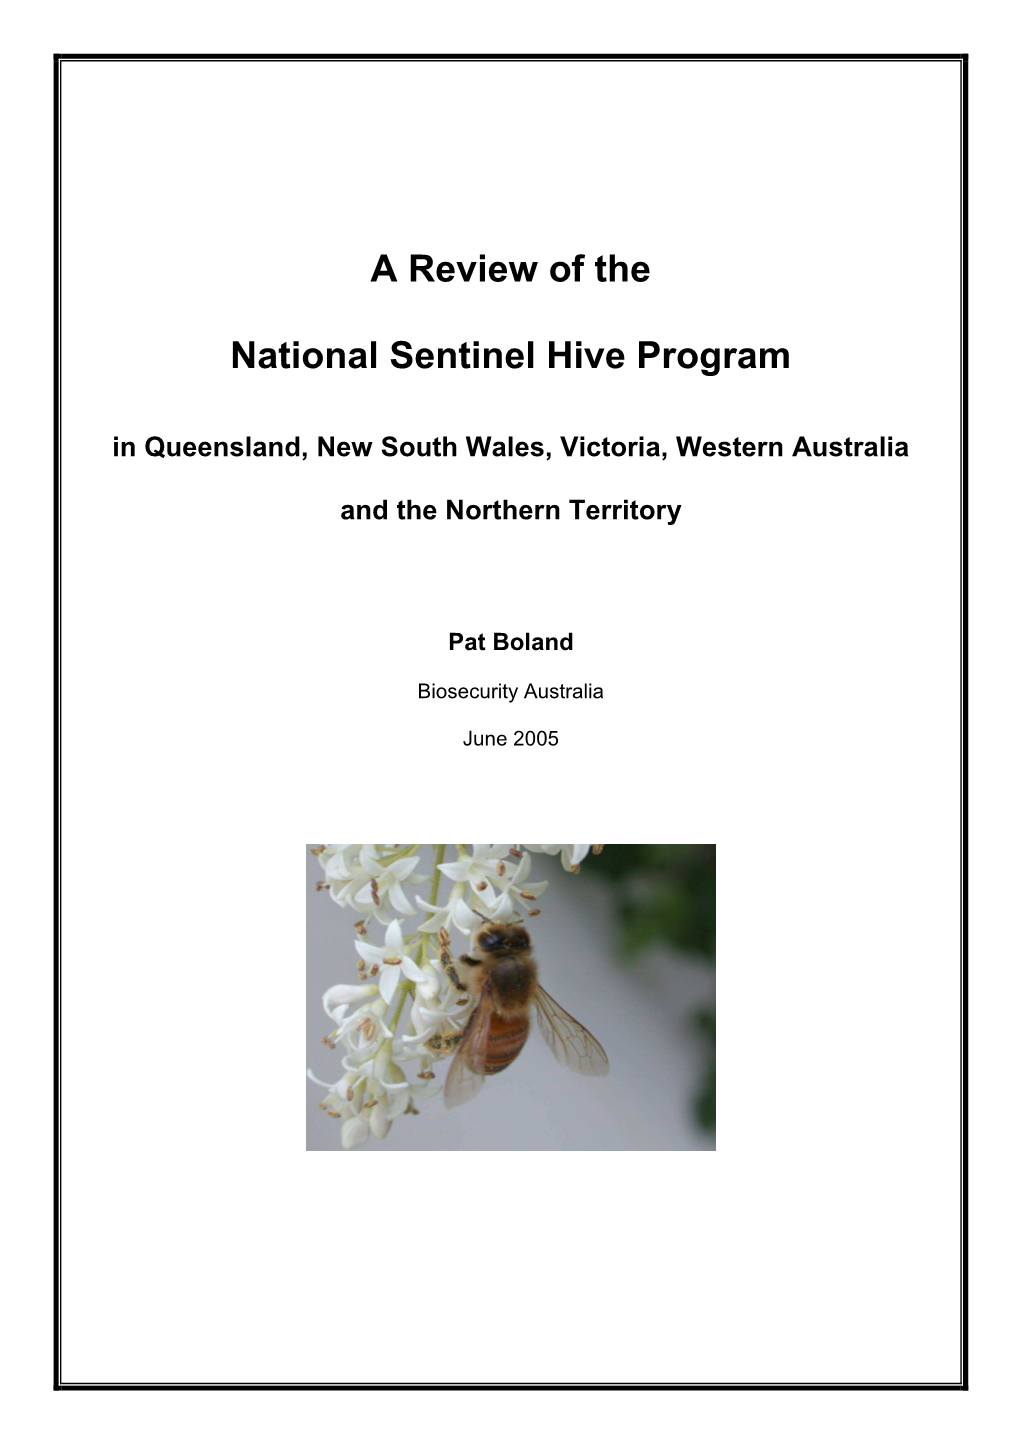 A Review of the National Sentinel Hive Program